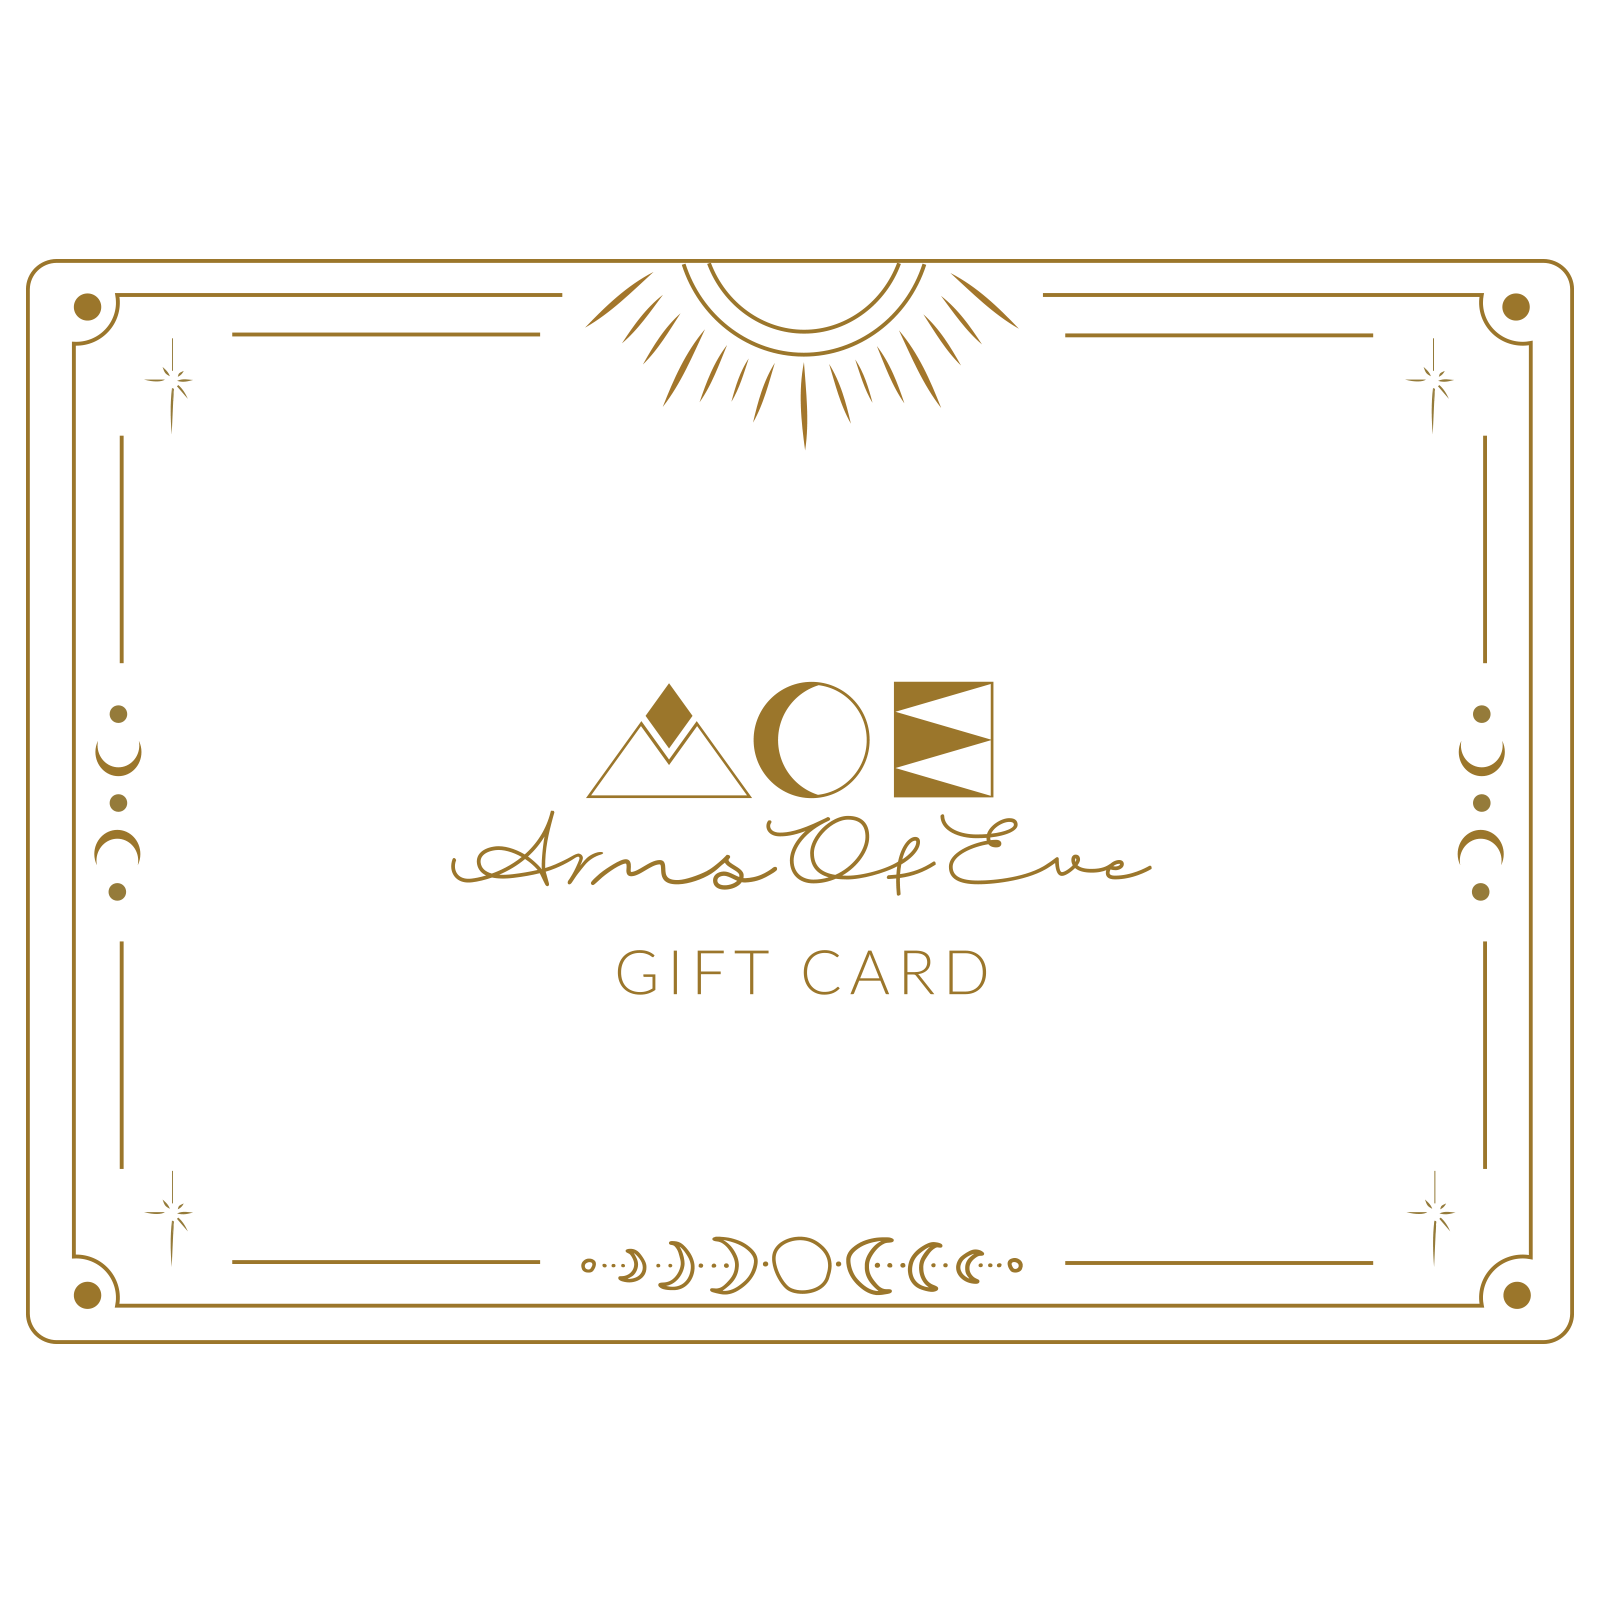 Arms Of Eve gift card with elegant gold frame or border, perfect for gifting handmade jewelry, bags and hats